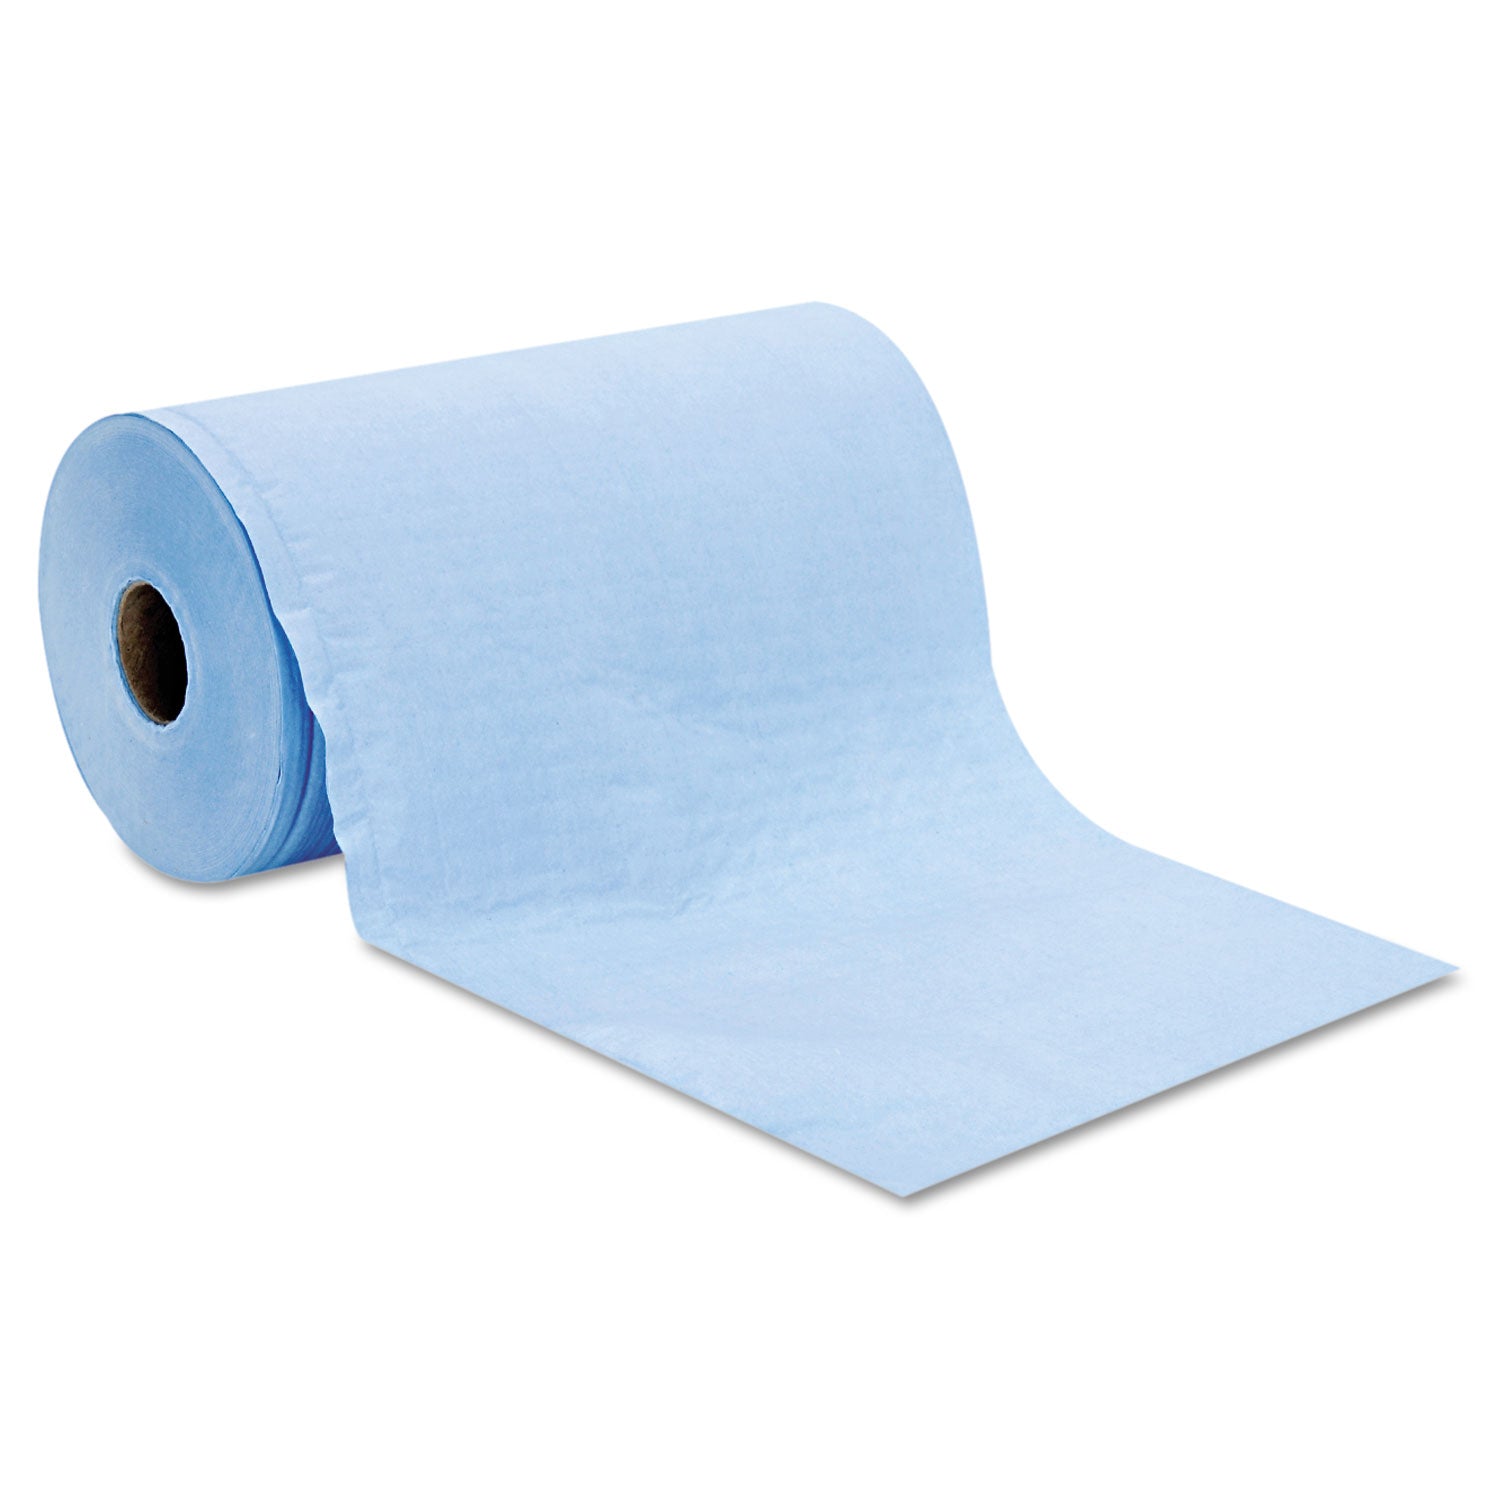 prism-scrim-reinforced-wipers-4-ply-975-x-275-ft-unscented-blue-6-rolls-carton_hosc2375bh - 2